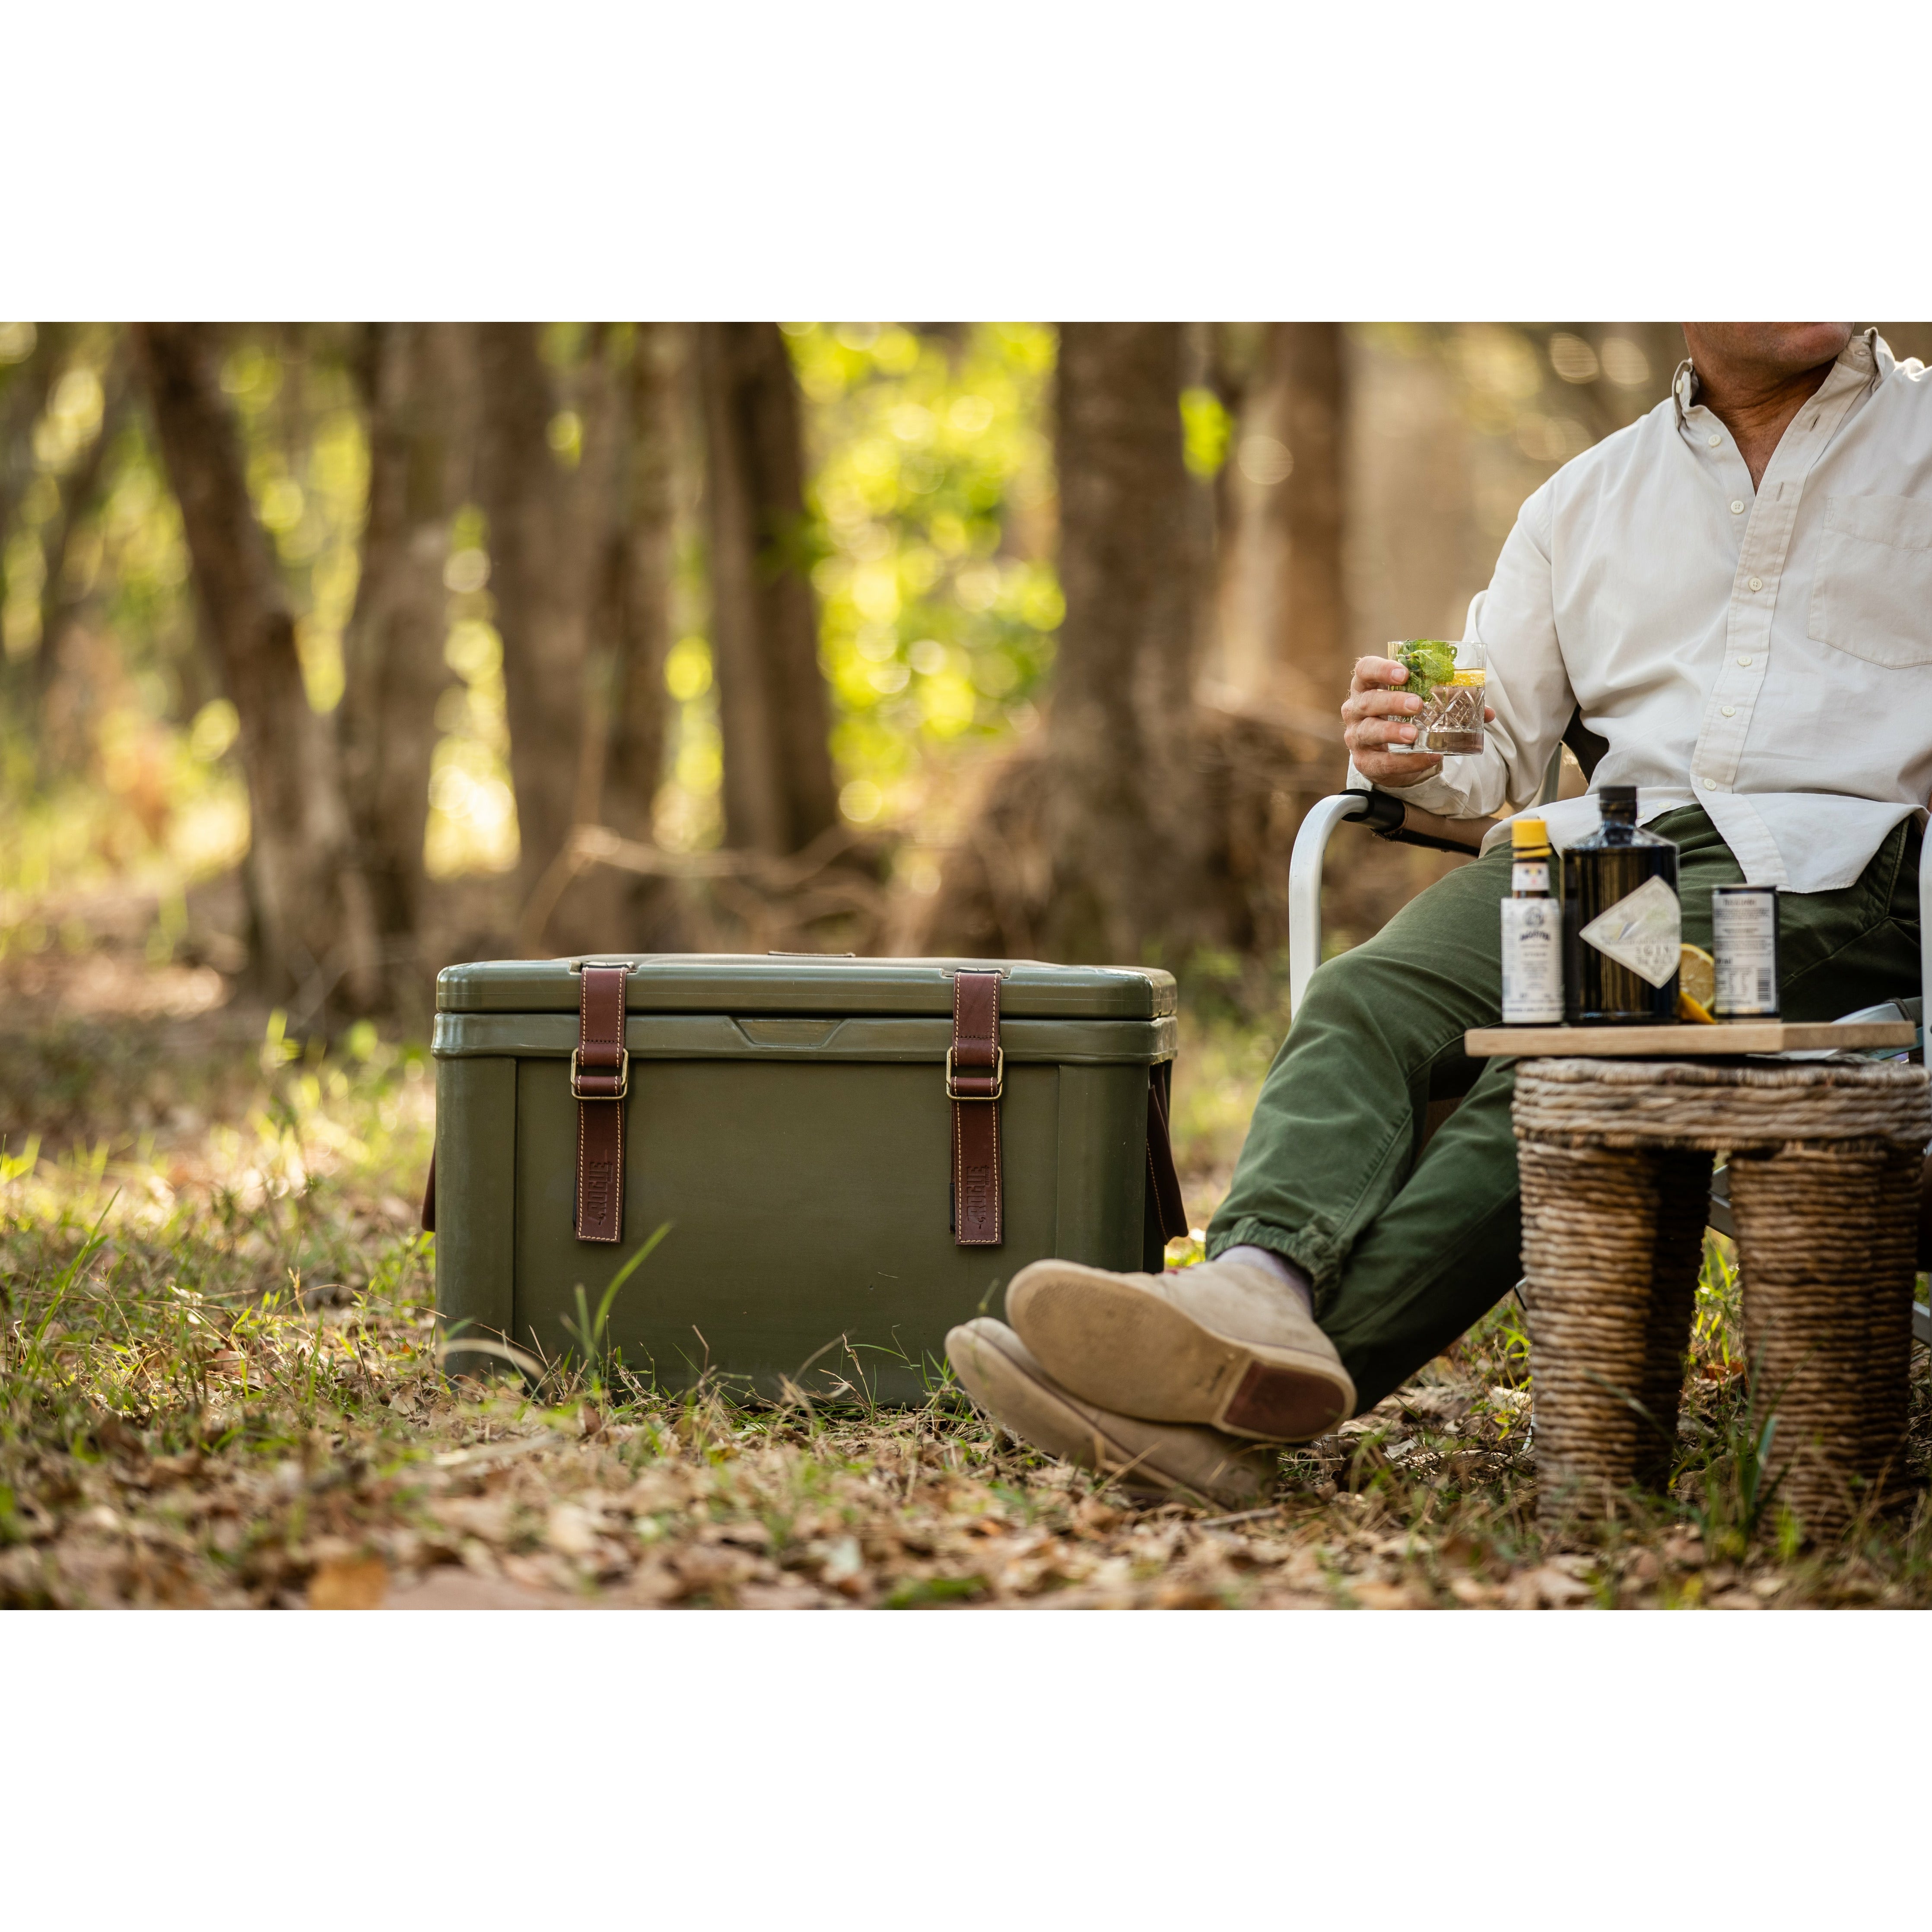 45L Rogue Ice Cooler with canvas seat – Rogue Ice Coolers